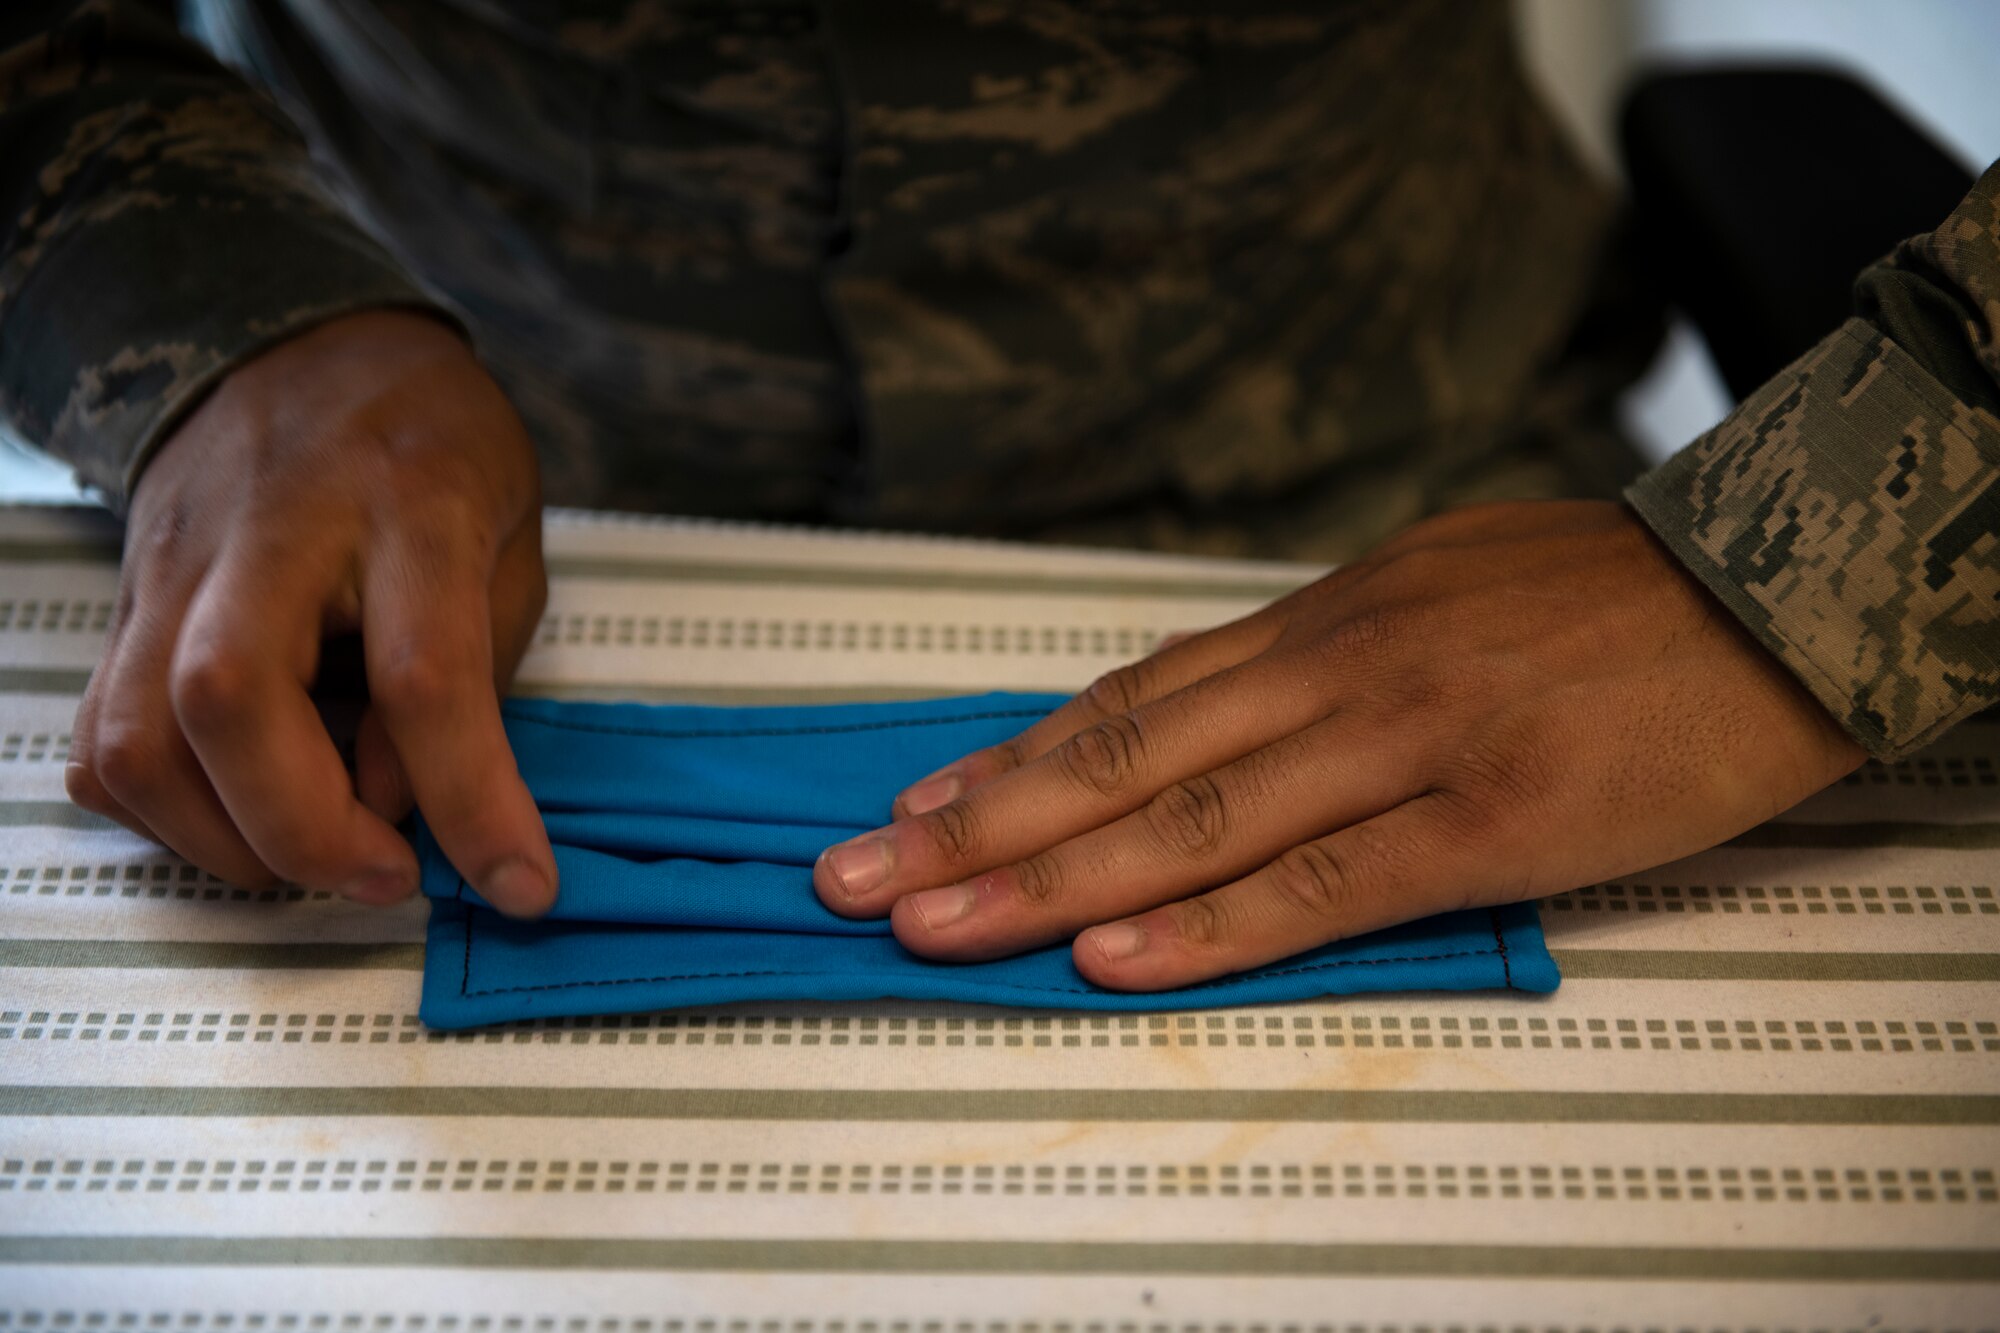 ALTUS AIR FORCE BASE, Okla. - U.S. Air Force Airman First Class Luis Mora, an Air Crew Flight Equipment (AFE) apprentice assigned to the 97th Operations Support Squadron, folds face masks for base members, April 6, 2020 at Altus Air Force Base Oklahoma.